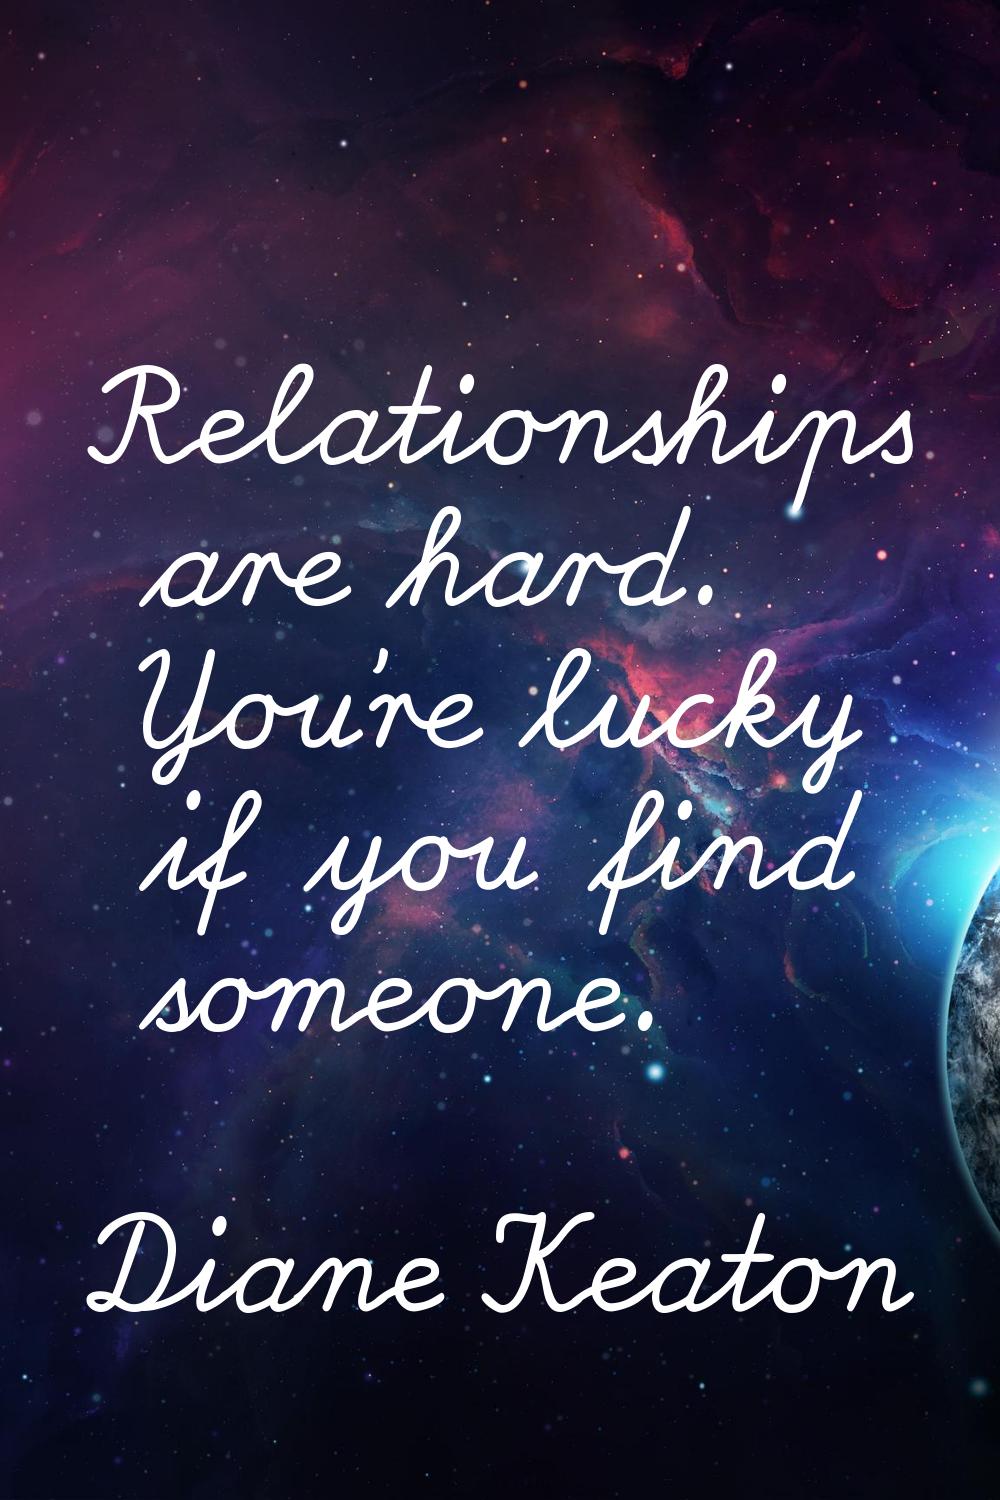 Relationships are hard. You're lucky if you find someone.